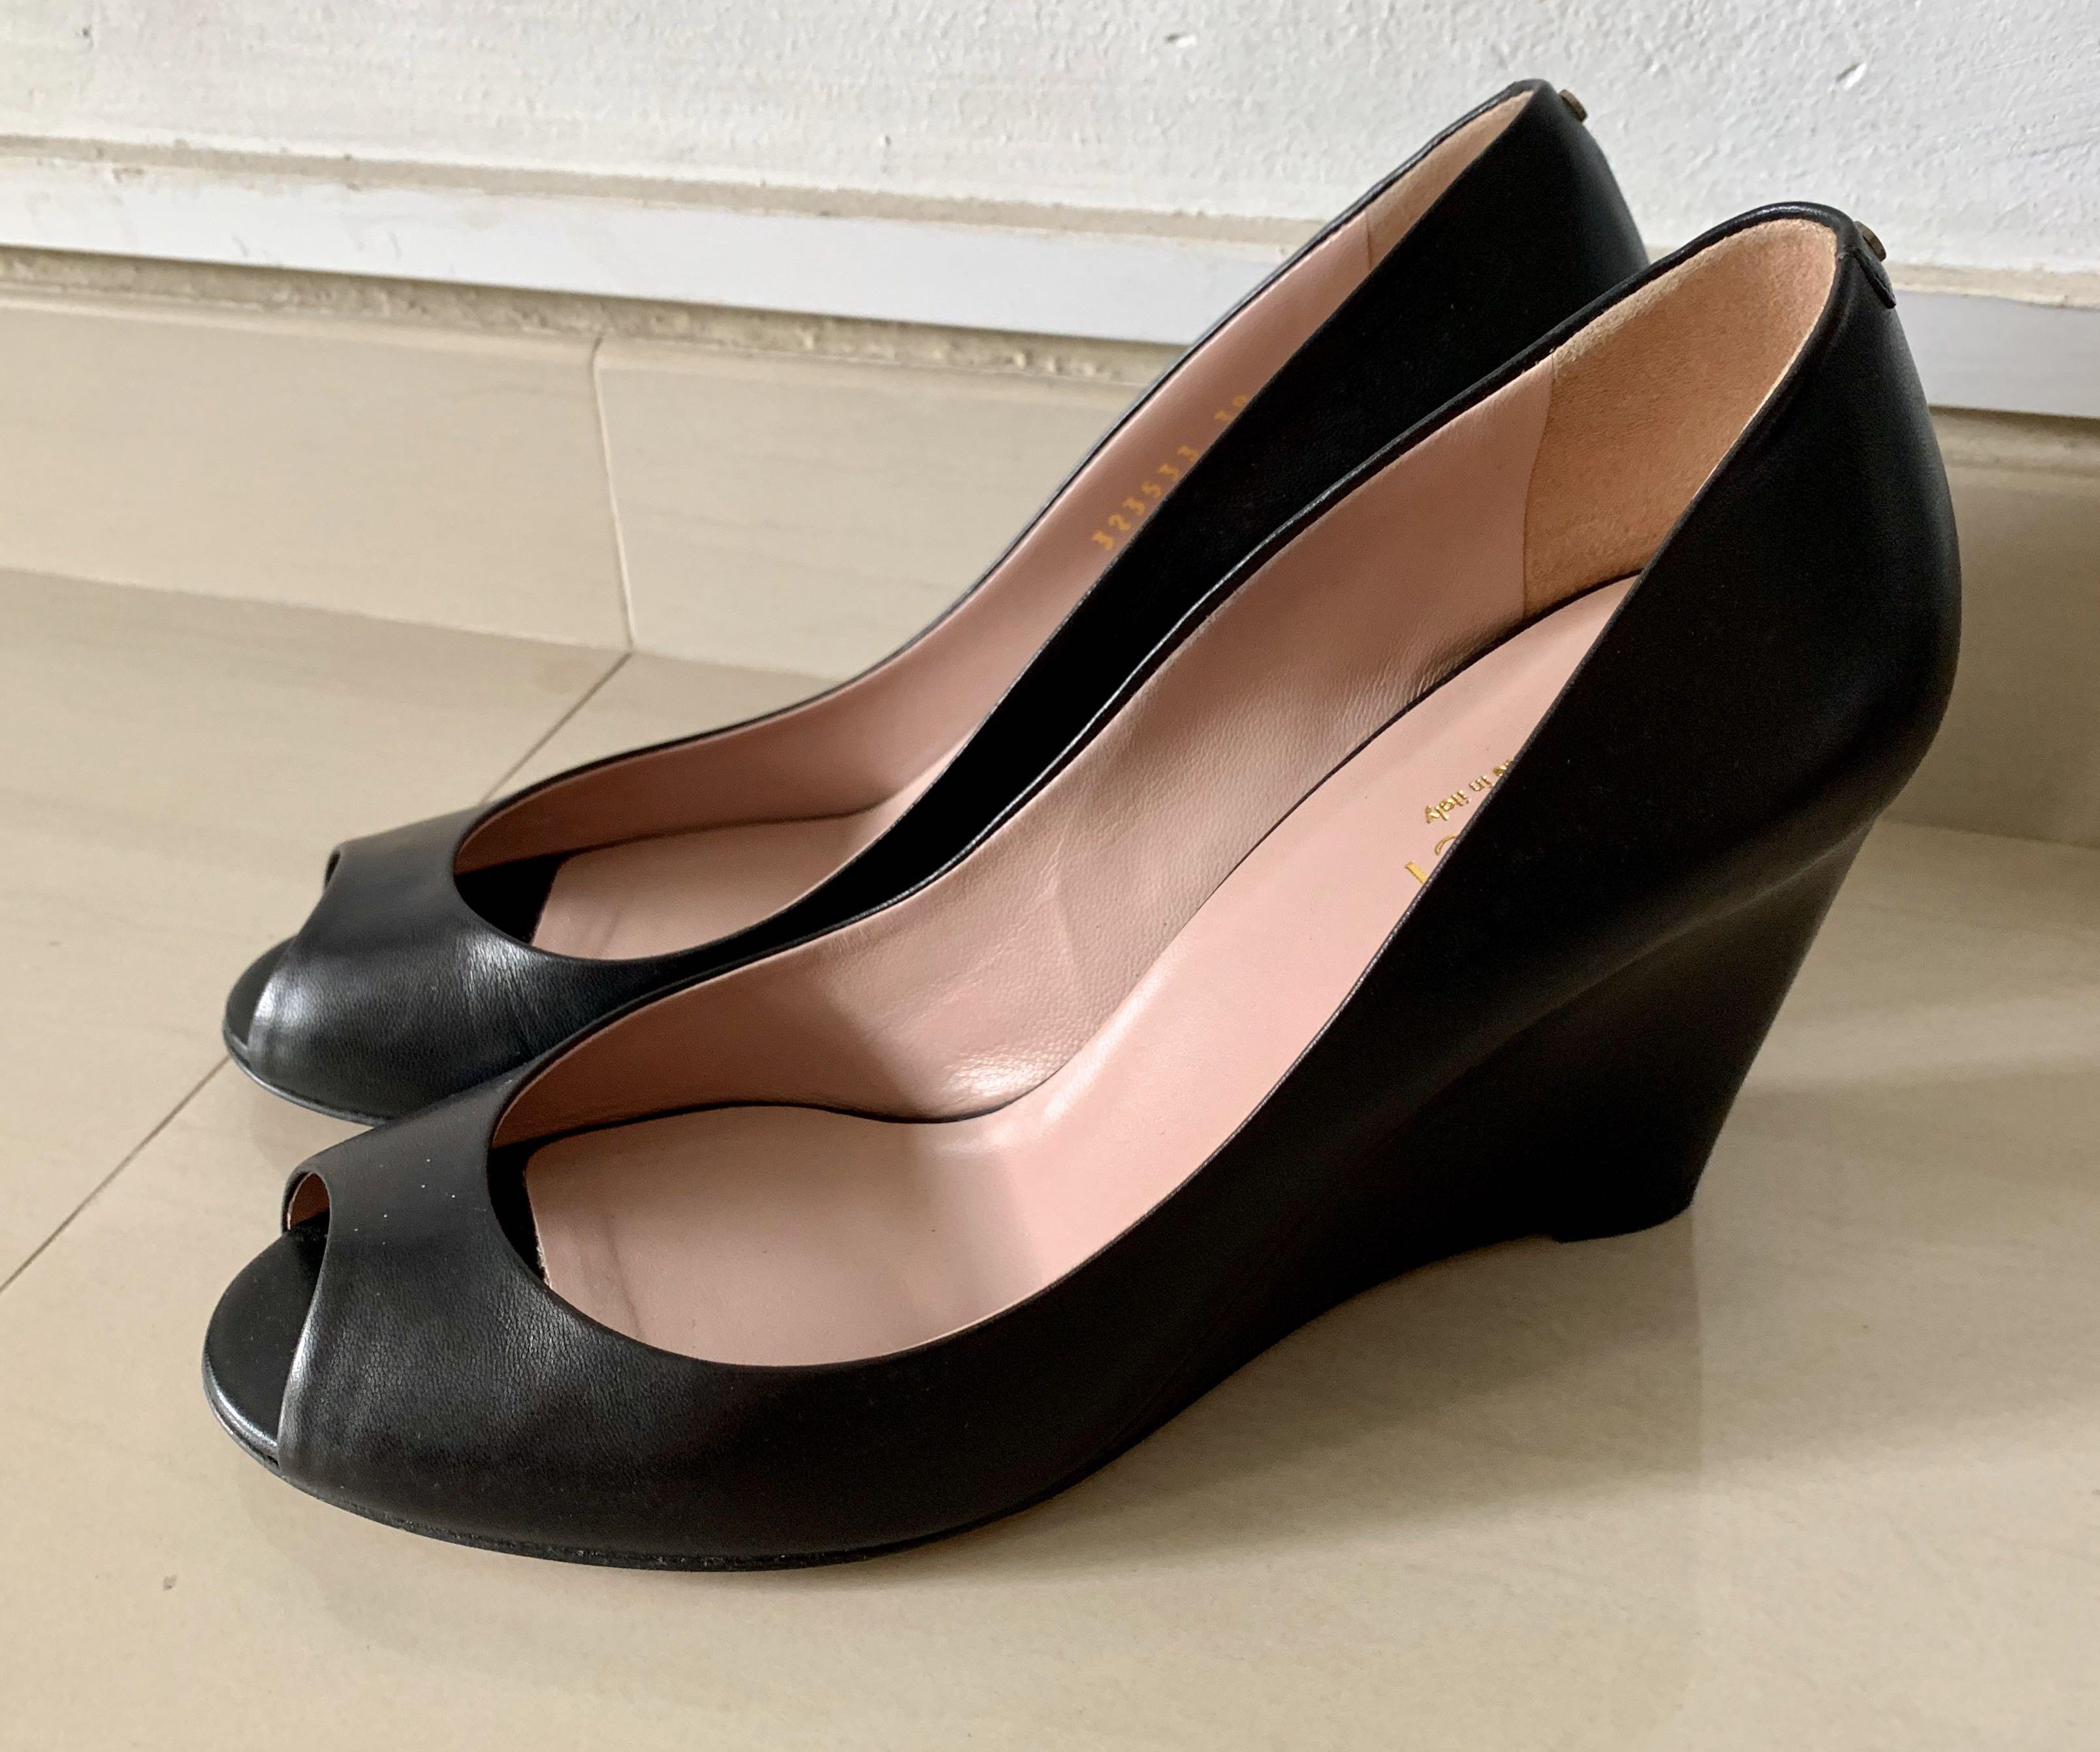 Pre-loved Gucci Leather Peep-toe Wedge 